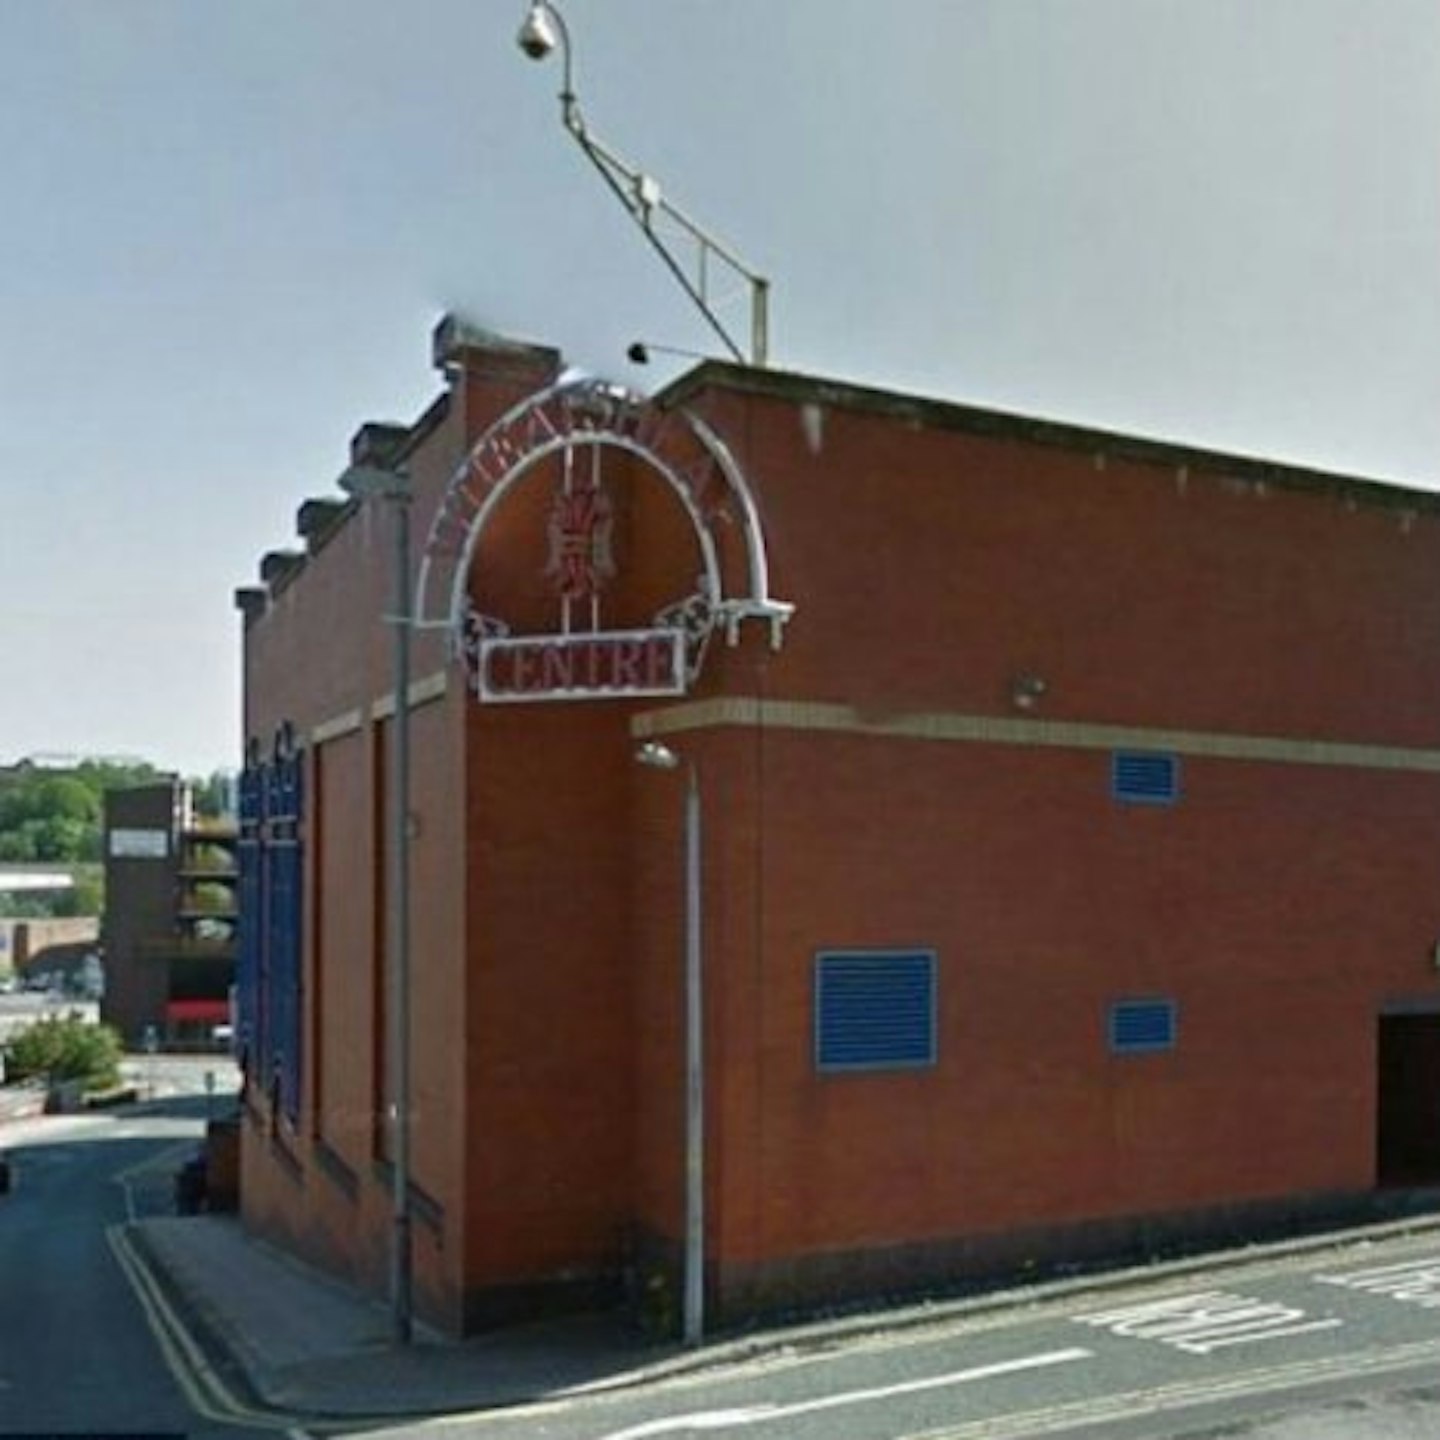 Tracy fell to her death from the Multi story car park at Rochdale's Wheatsheaf Shopping Centre